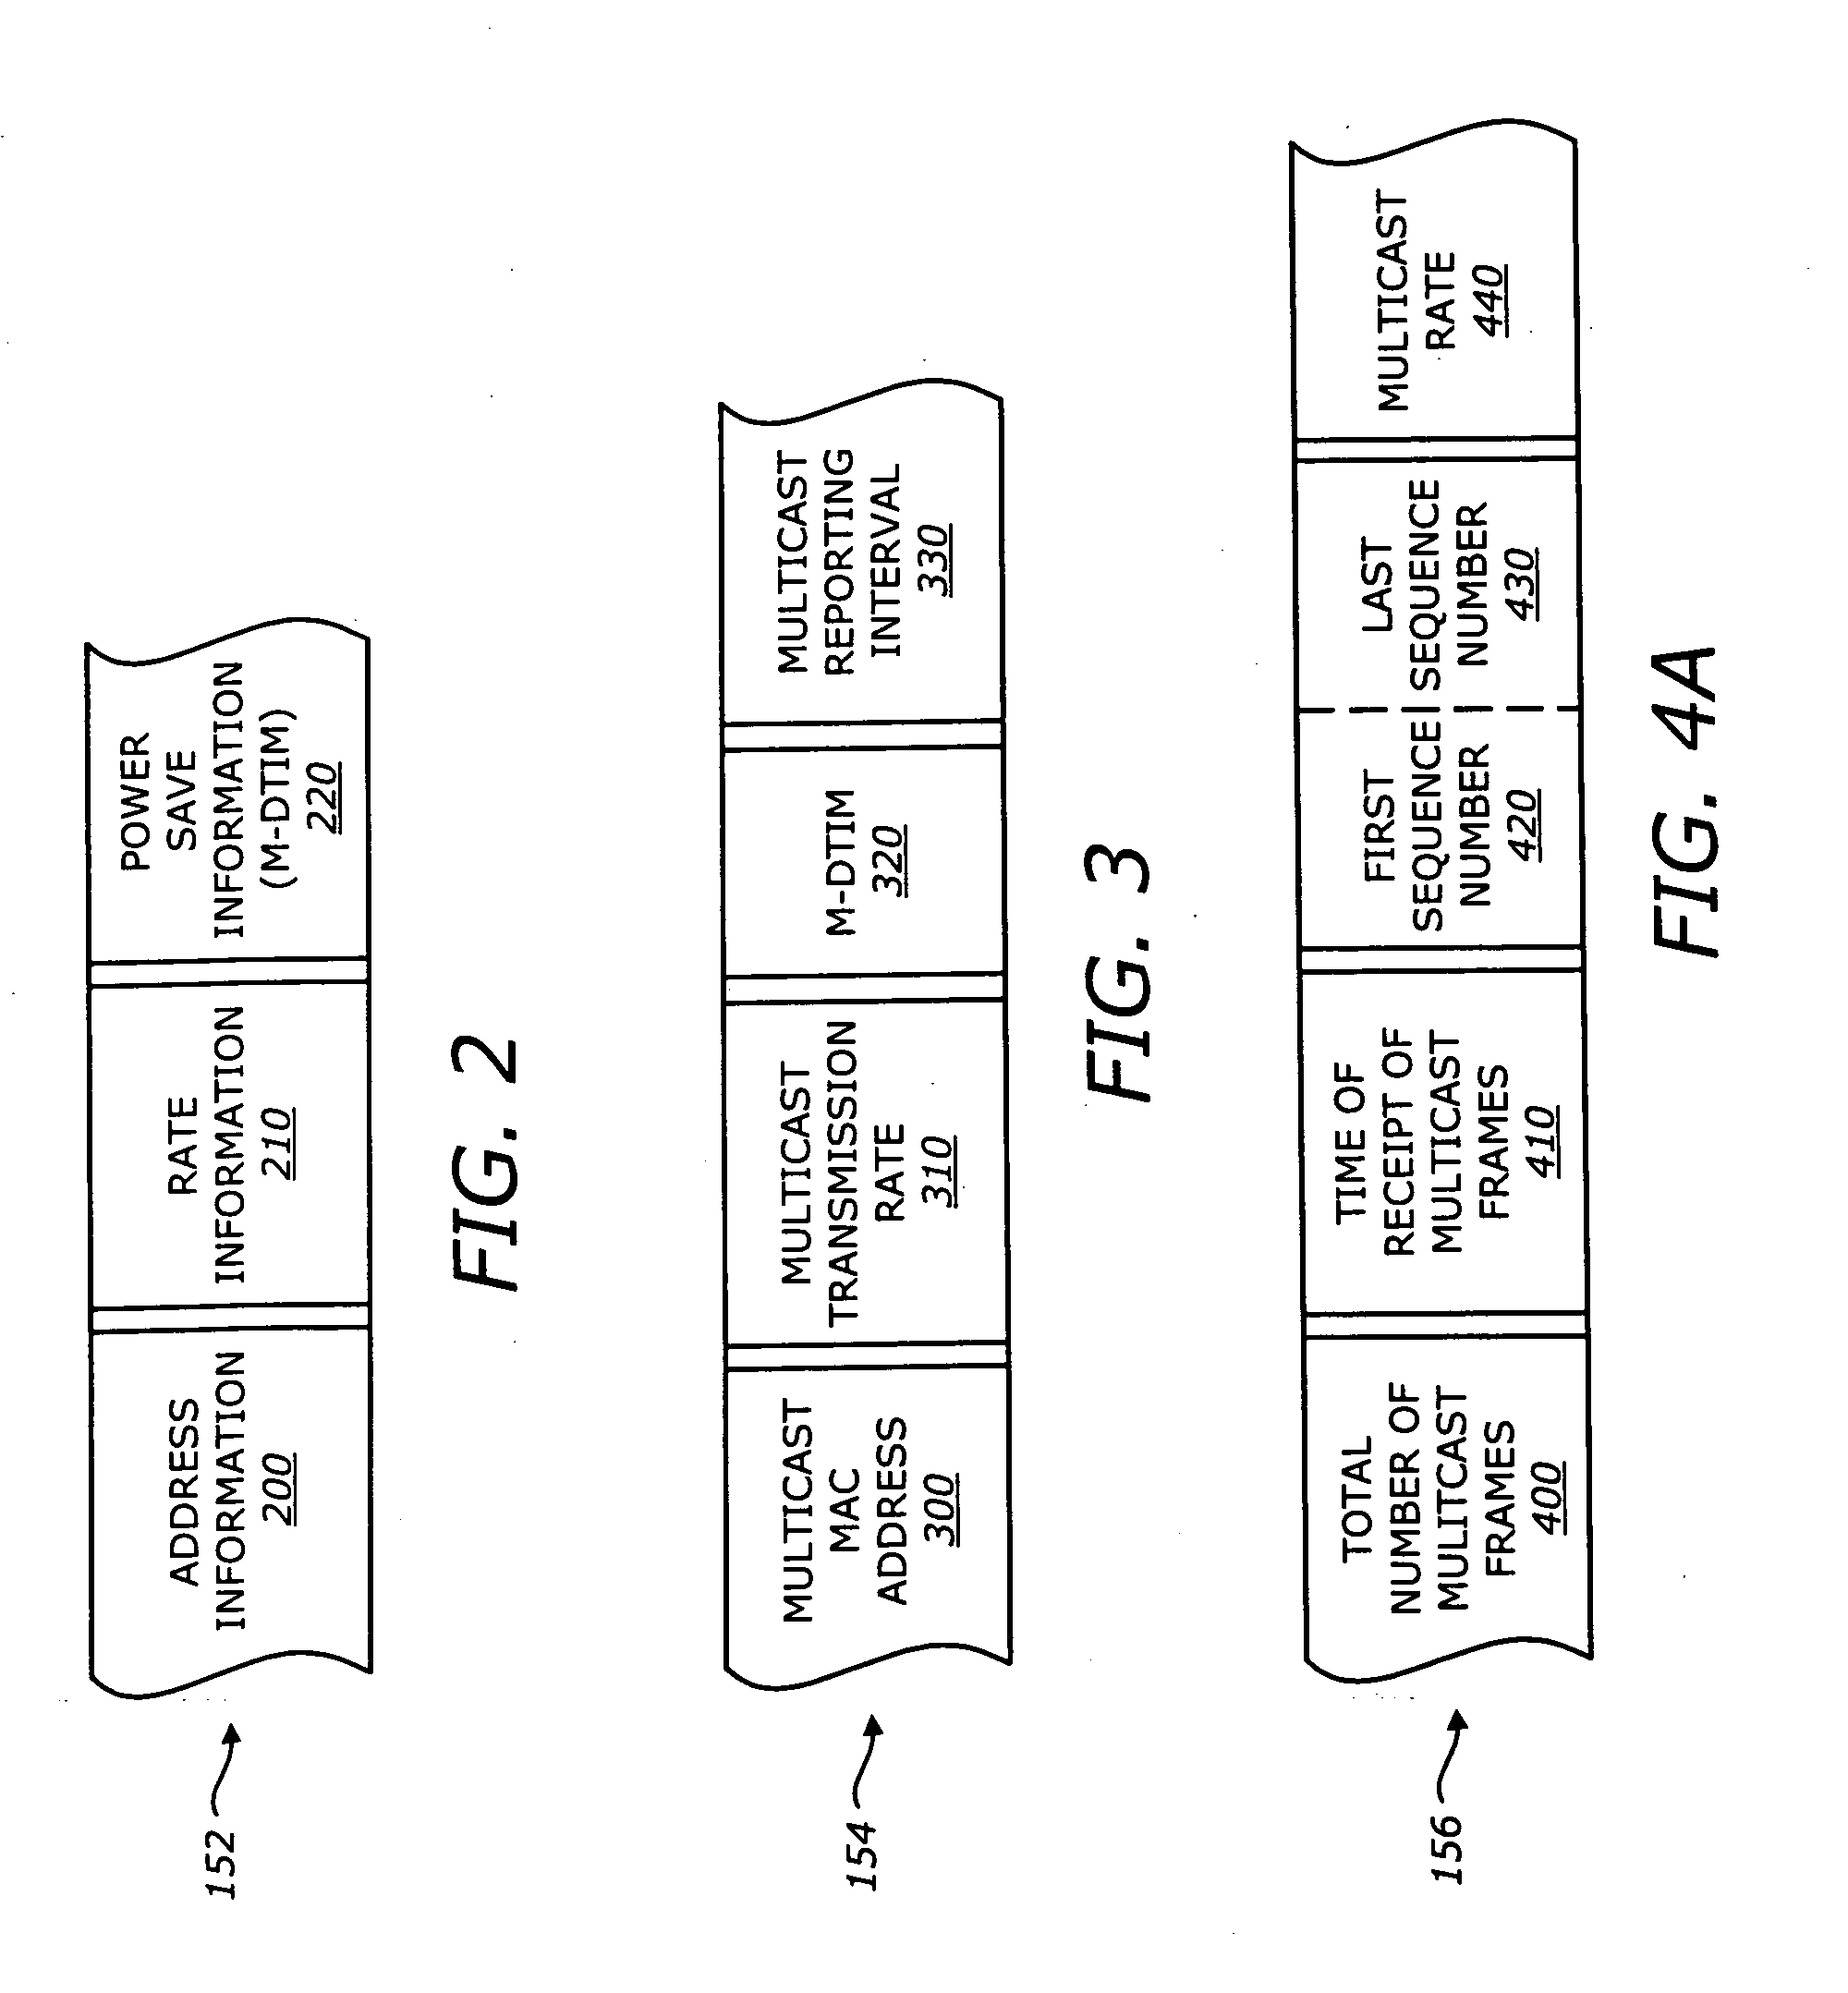 System and method for reliable multicast transmissions over shared wireless media for spectrum efficiency and battery power conservation